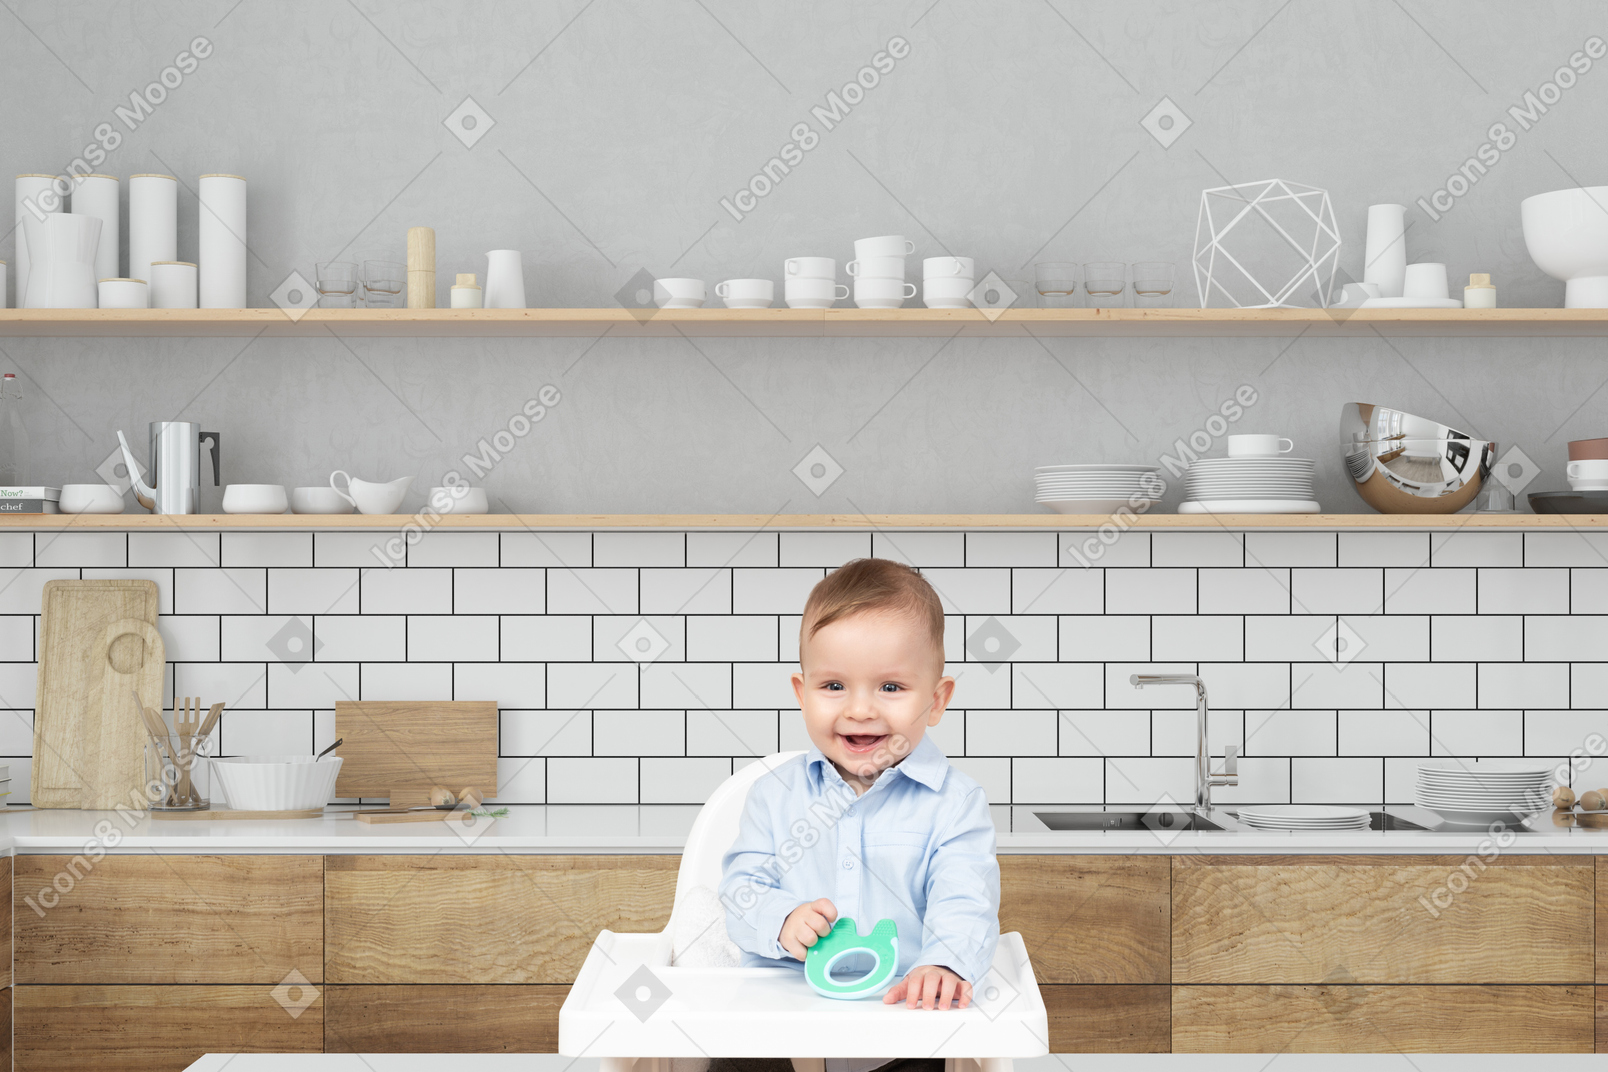 A baby sitting in a high chair in a kitchen